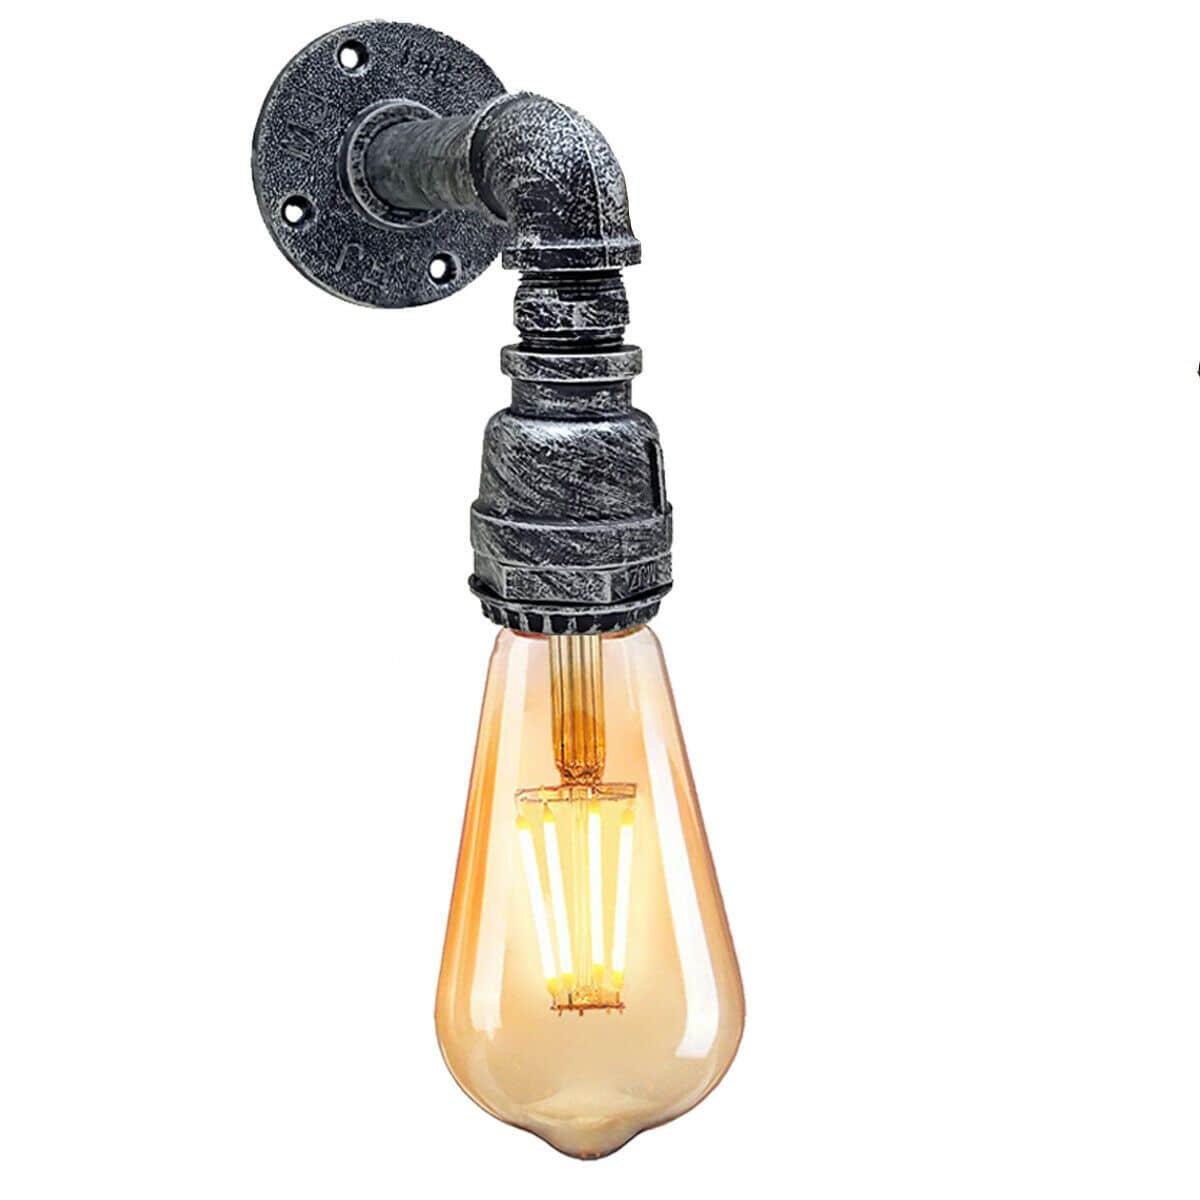 Brushed Silver Antique Retro industrial Pipe lighting sconce water pipe wall light steam punk~2337 - LEDSone UK Ltd